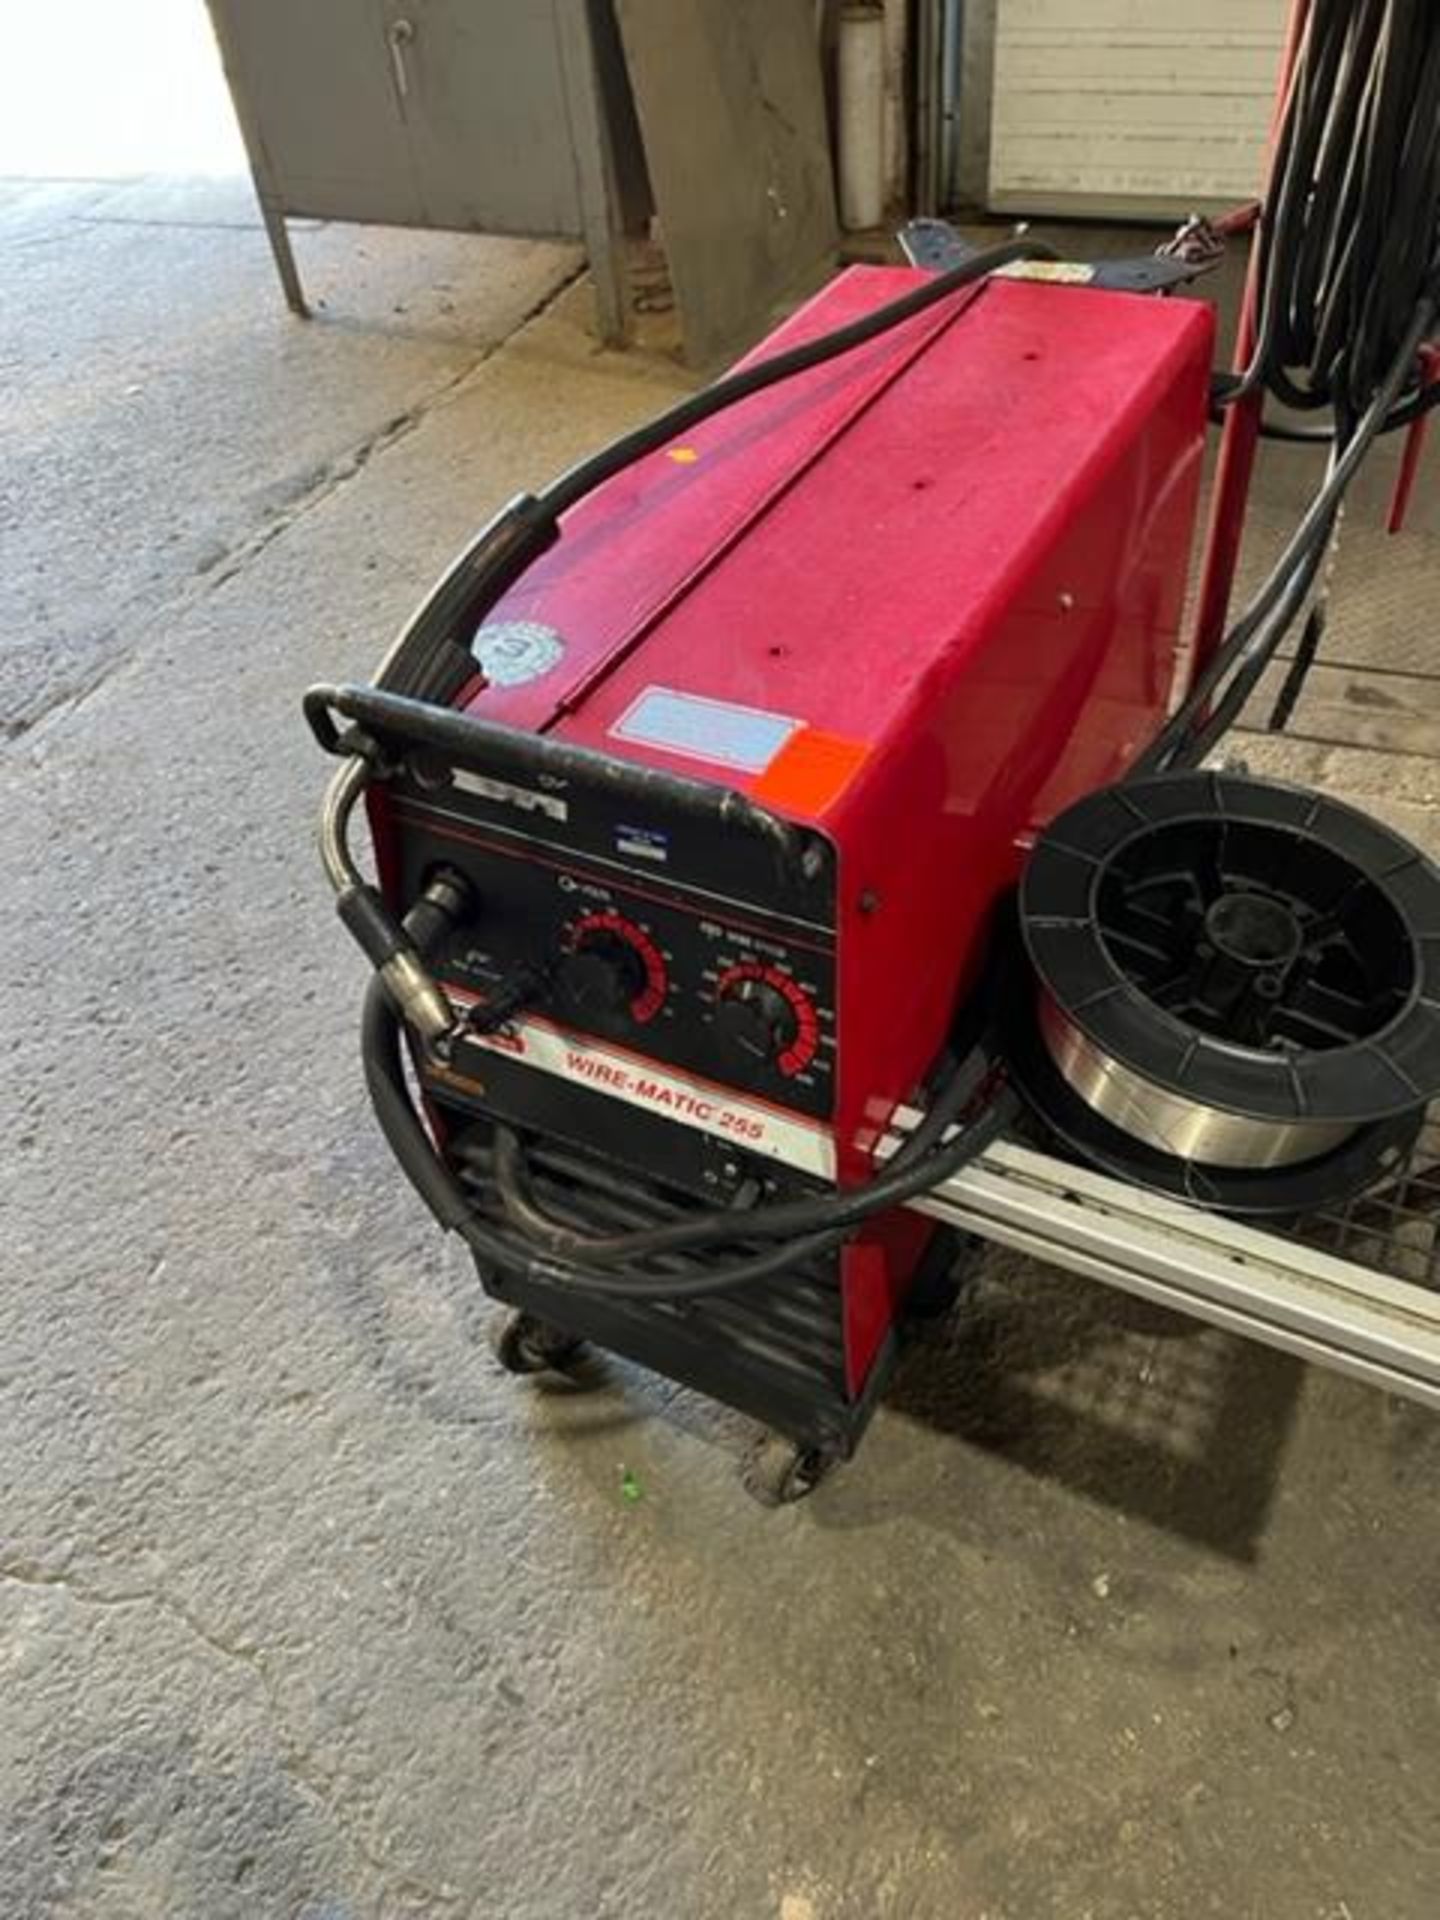 Lincoln Wirematic 255 Mig Welder with built in feeder 230/480/575V Complete with gun and cables - Image 4 of 4